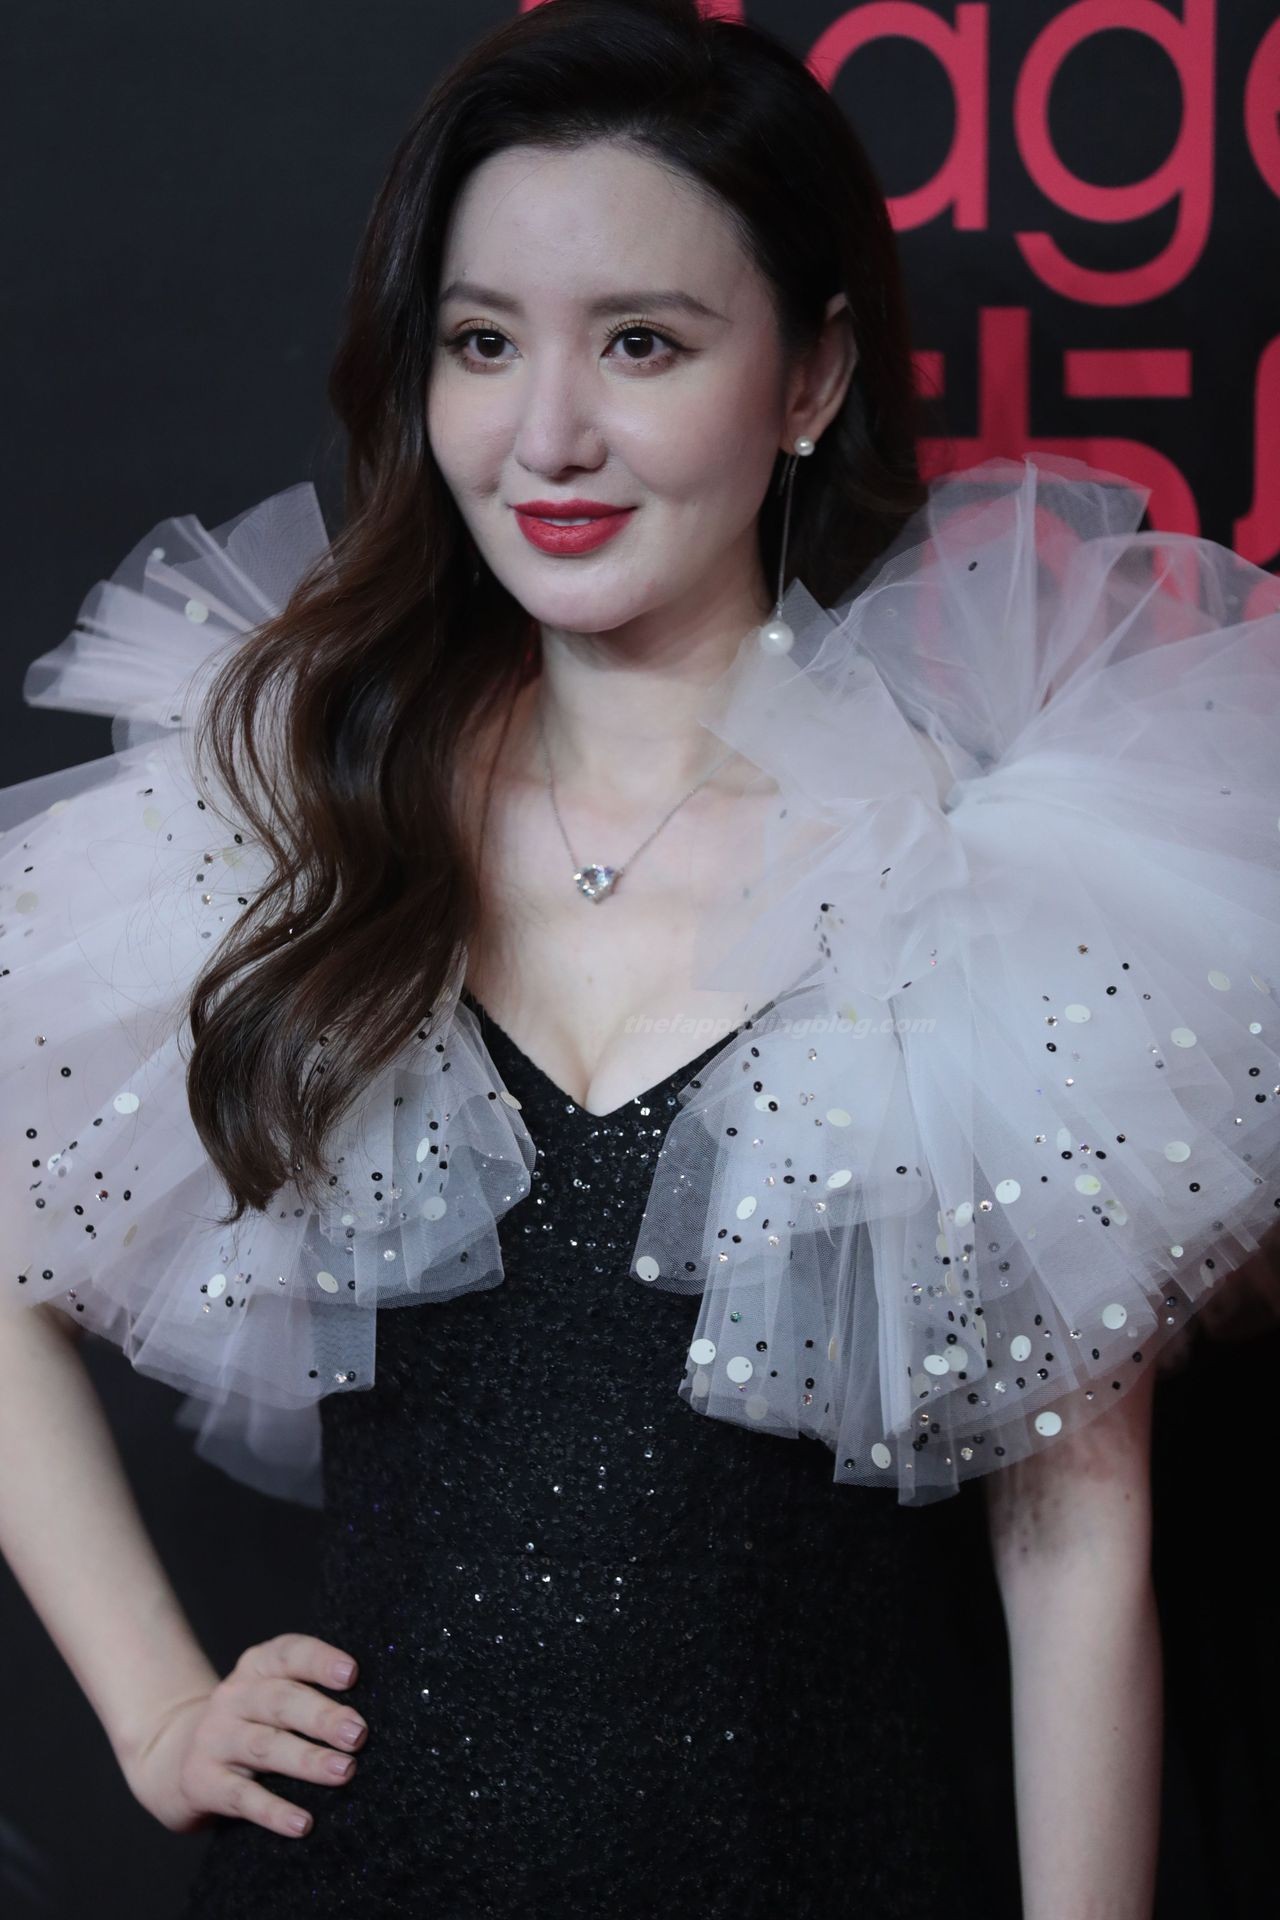 Zhang Meng Shows Her Cleavage at the Cosmo Event